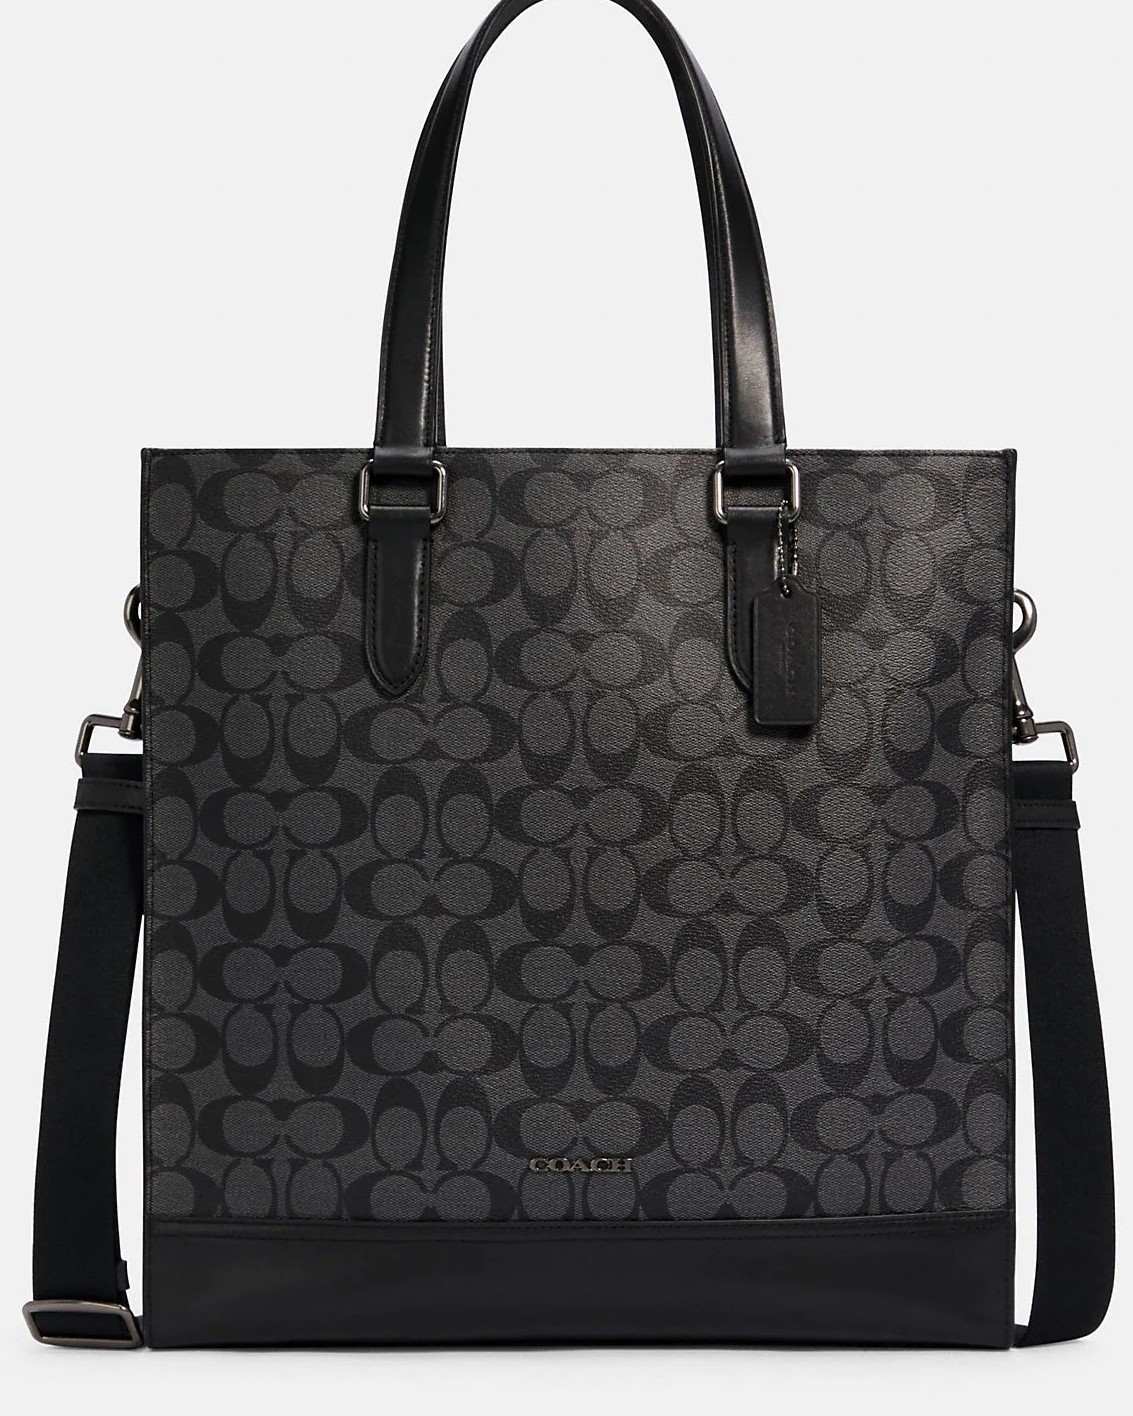 TÚI TOTE SIZE LỚN HỌA TIẾT COACH GRAHAM STRUCTURED TOTE IN GUNMETAL CHARCOAL BLACK SIGNATURE CANVAS C3232 3